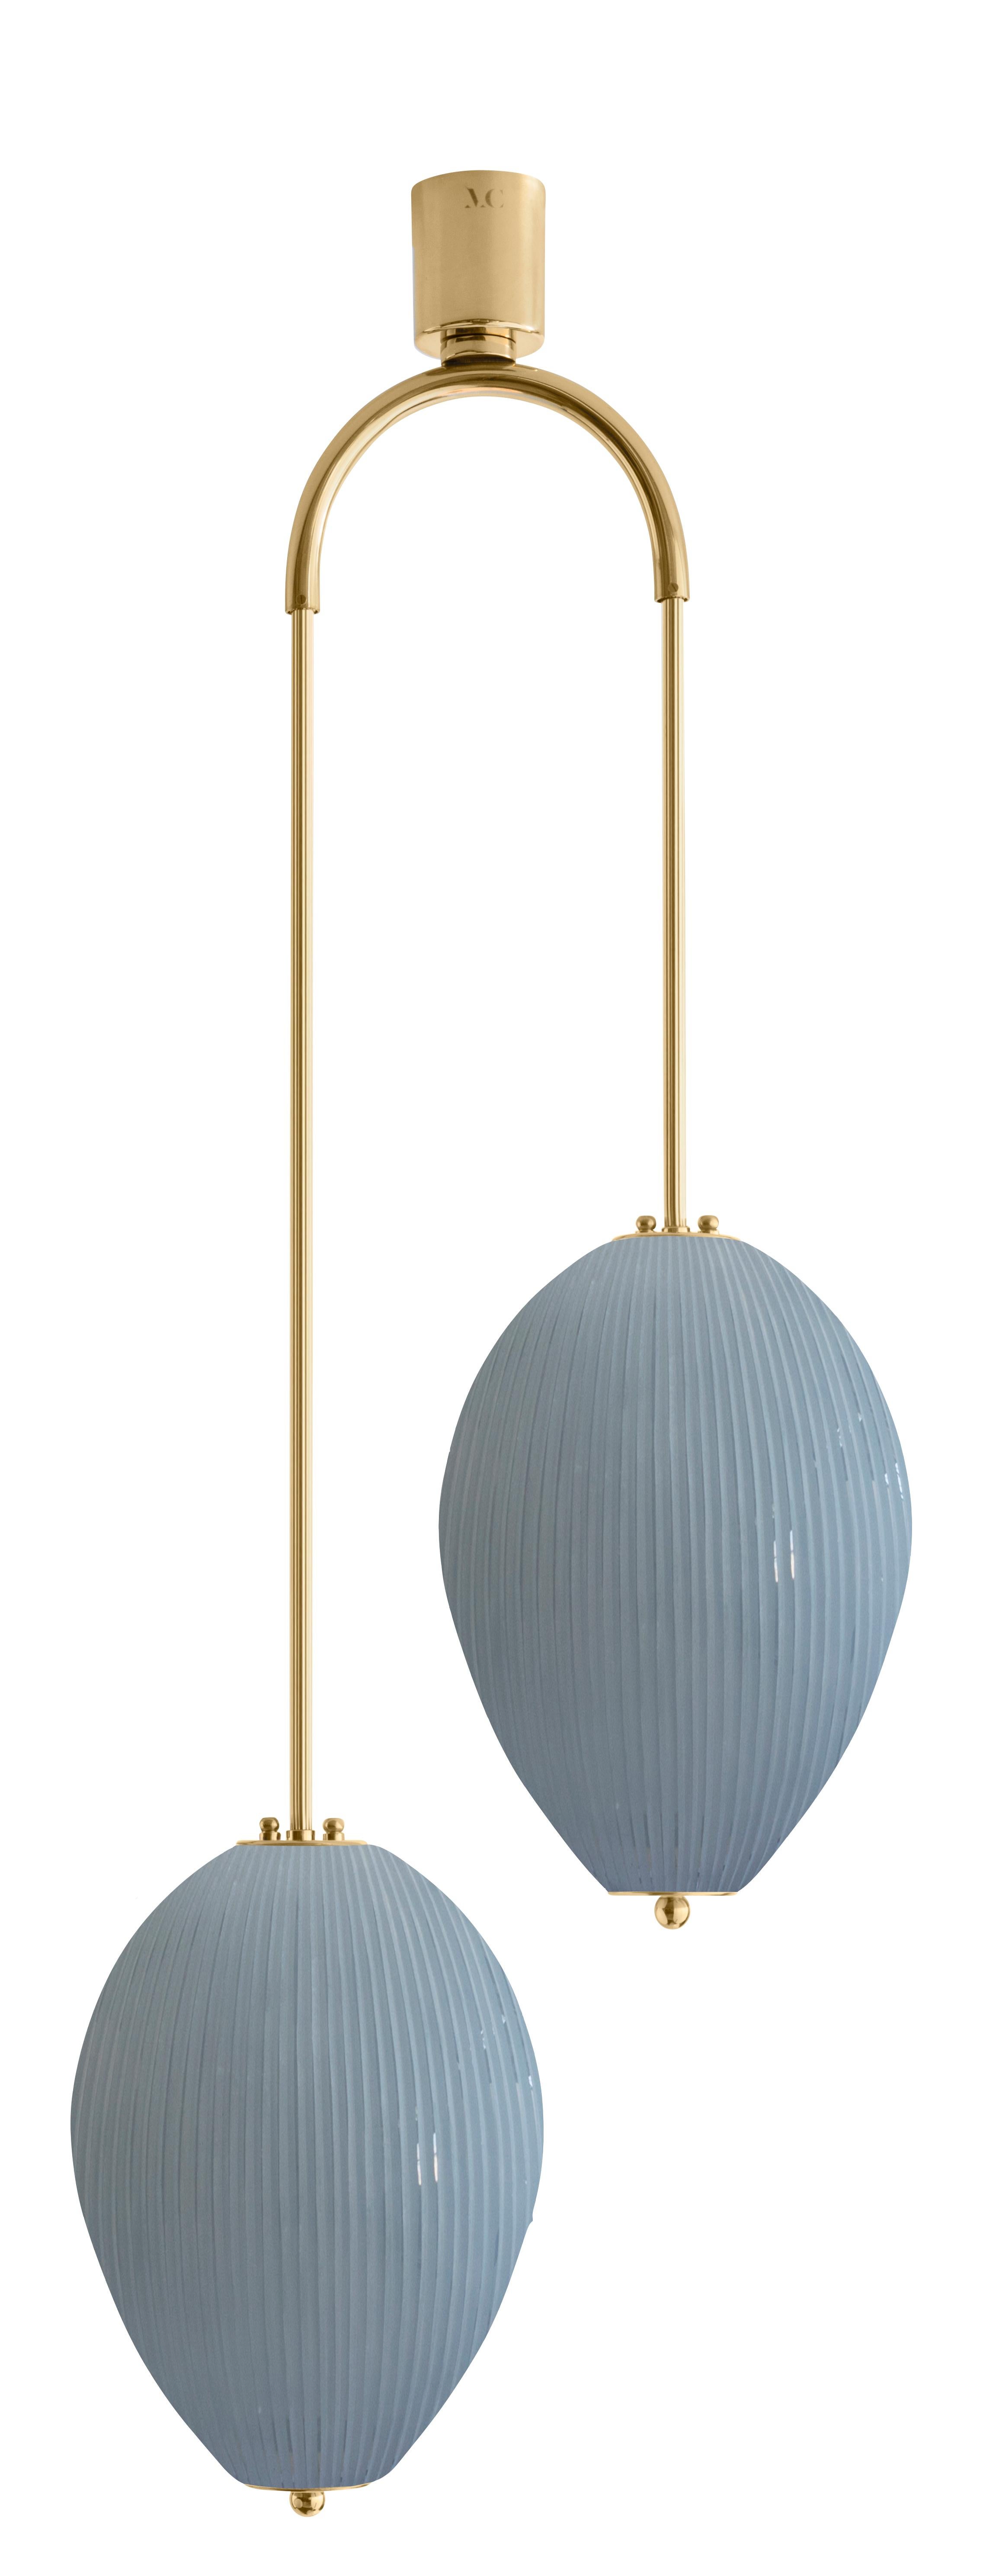 Double chandelier China 10 by Magic Circus Editions
Dimensions: H 121.5 x W 44.3 x D 25.2 cm
Materials: Brass, mouth blown glass sculpted with a diamond saw
Colour: opal grey

Available finishes: Brass, nickel
Available colours: enamel soft